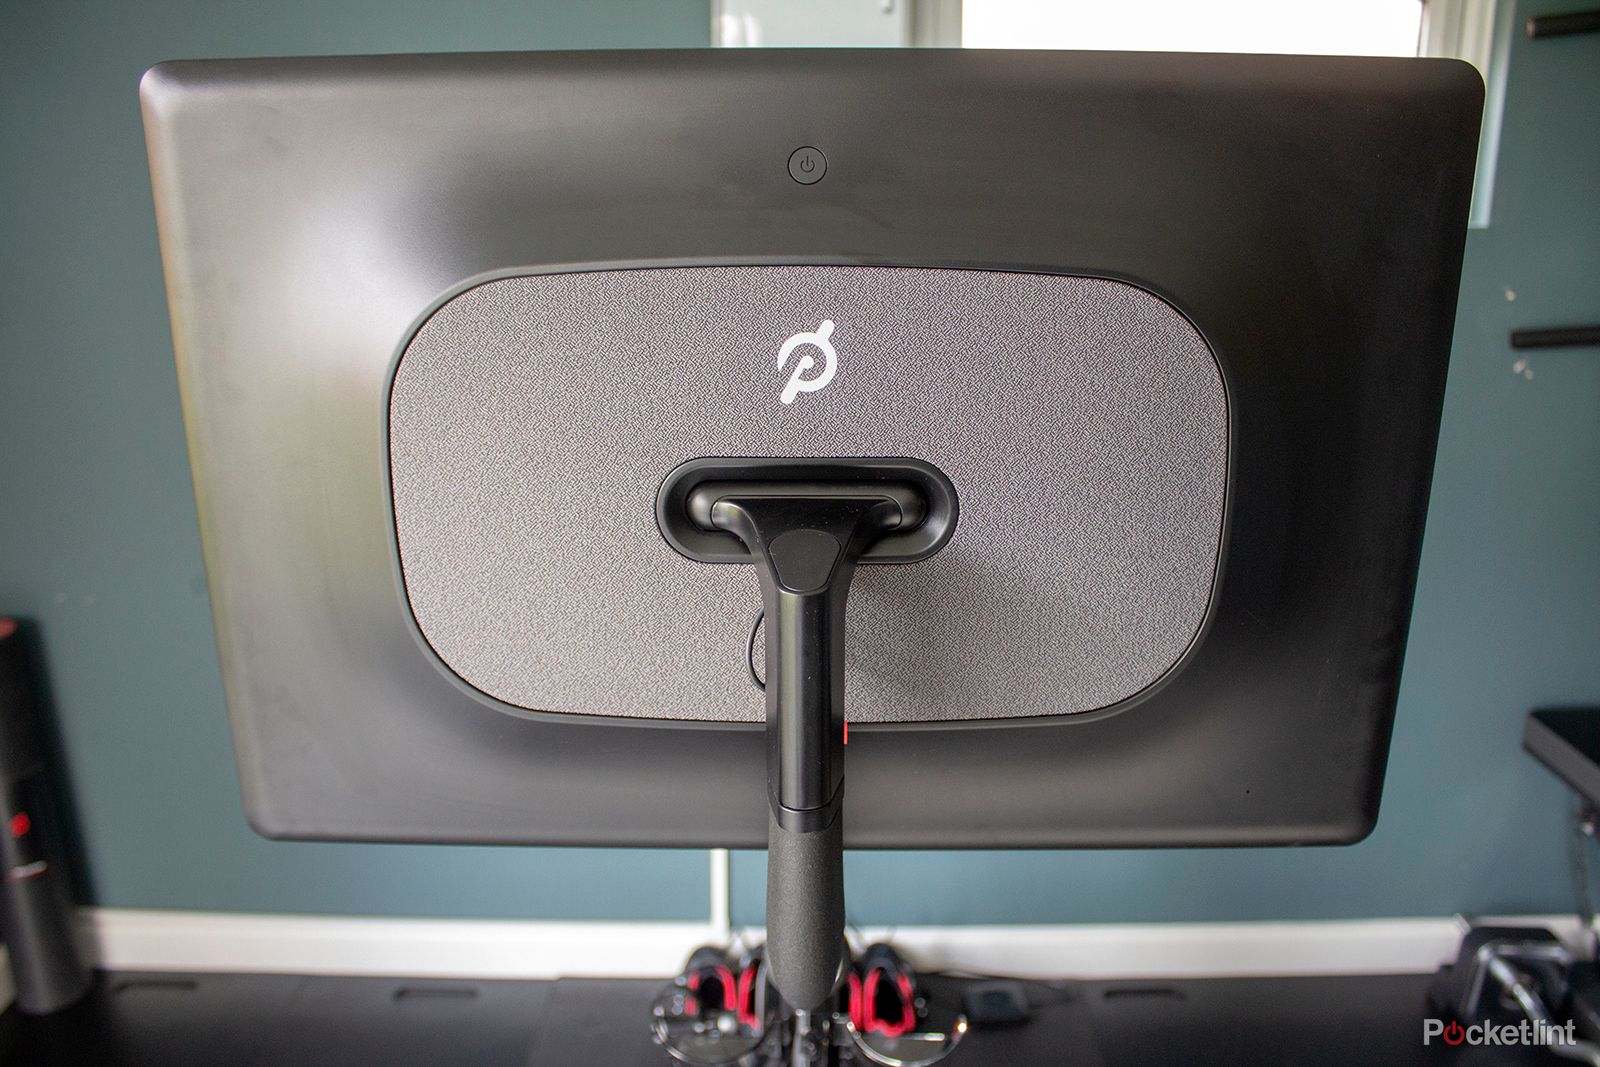 Peloton confirms it's working on a rowing machine photo 1